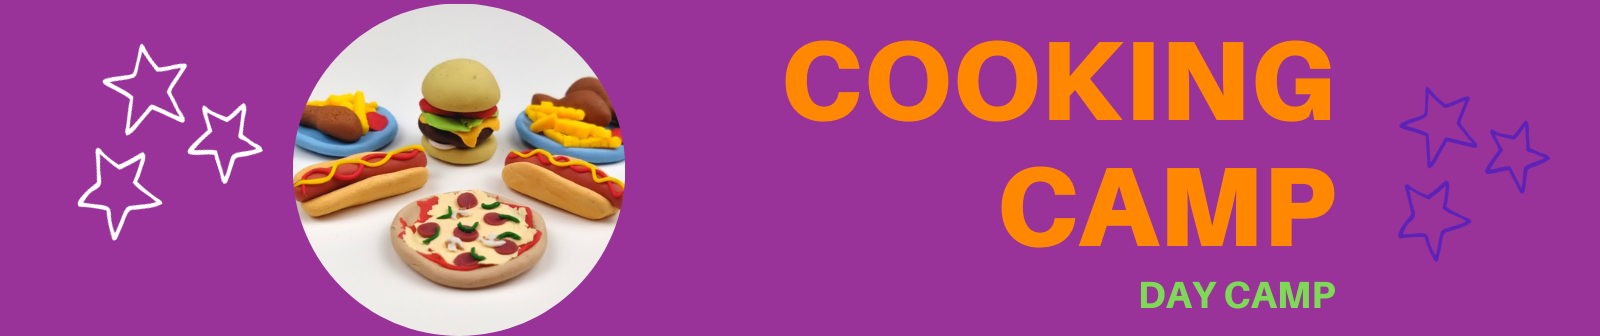 cooking camp banner